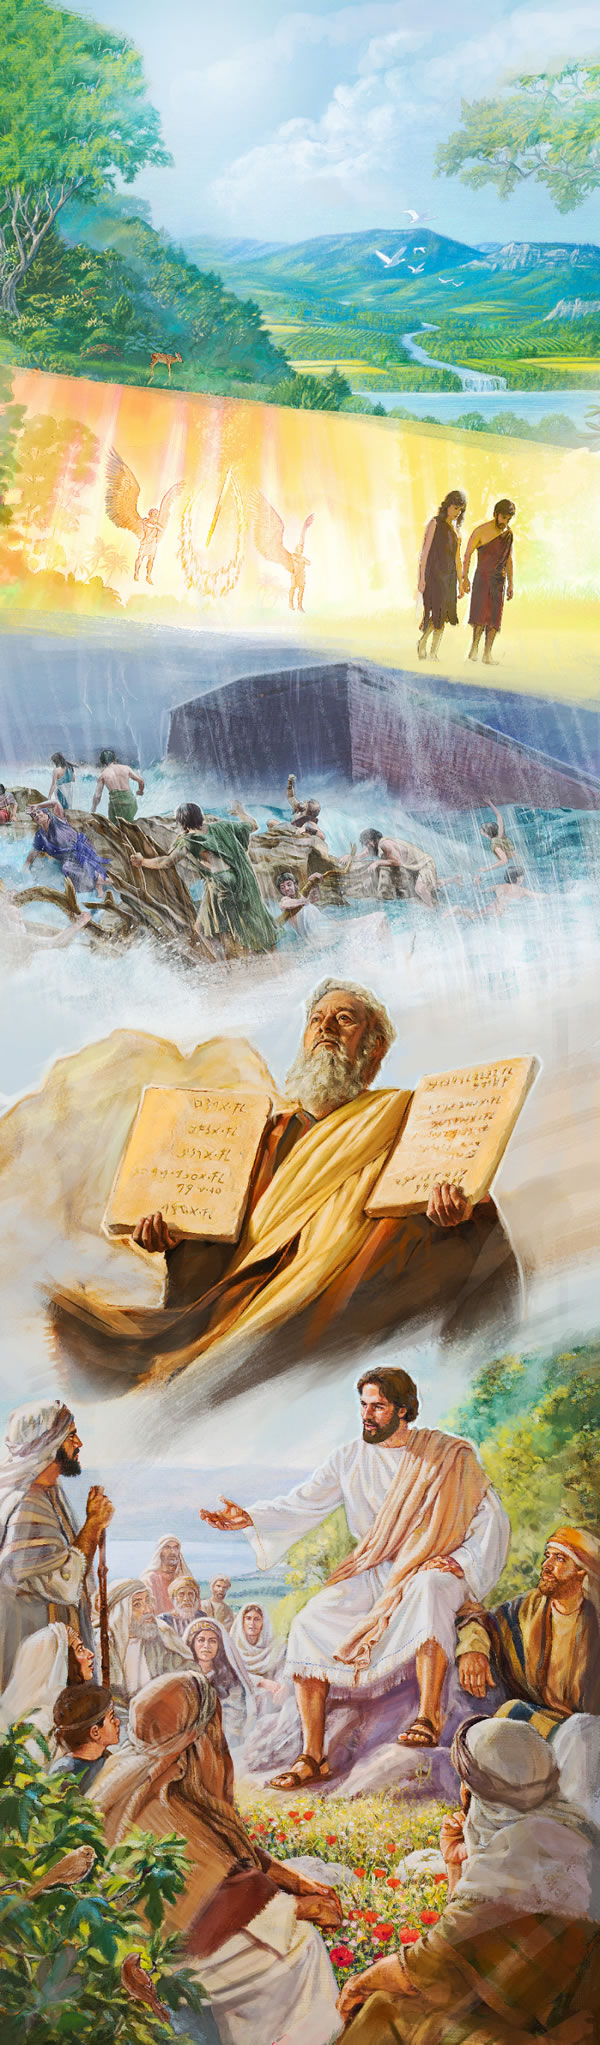 Scenes of original Paradise, Paradise lost, the Flood of Noah’s day, Moses with the 10 Commandments, and Jesus teaching.